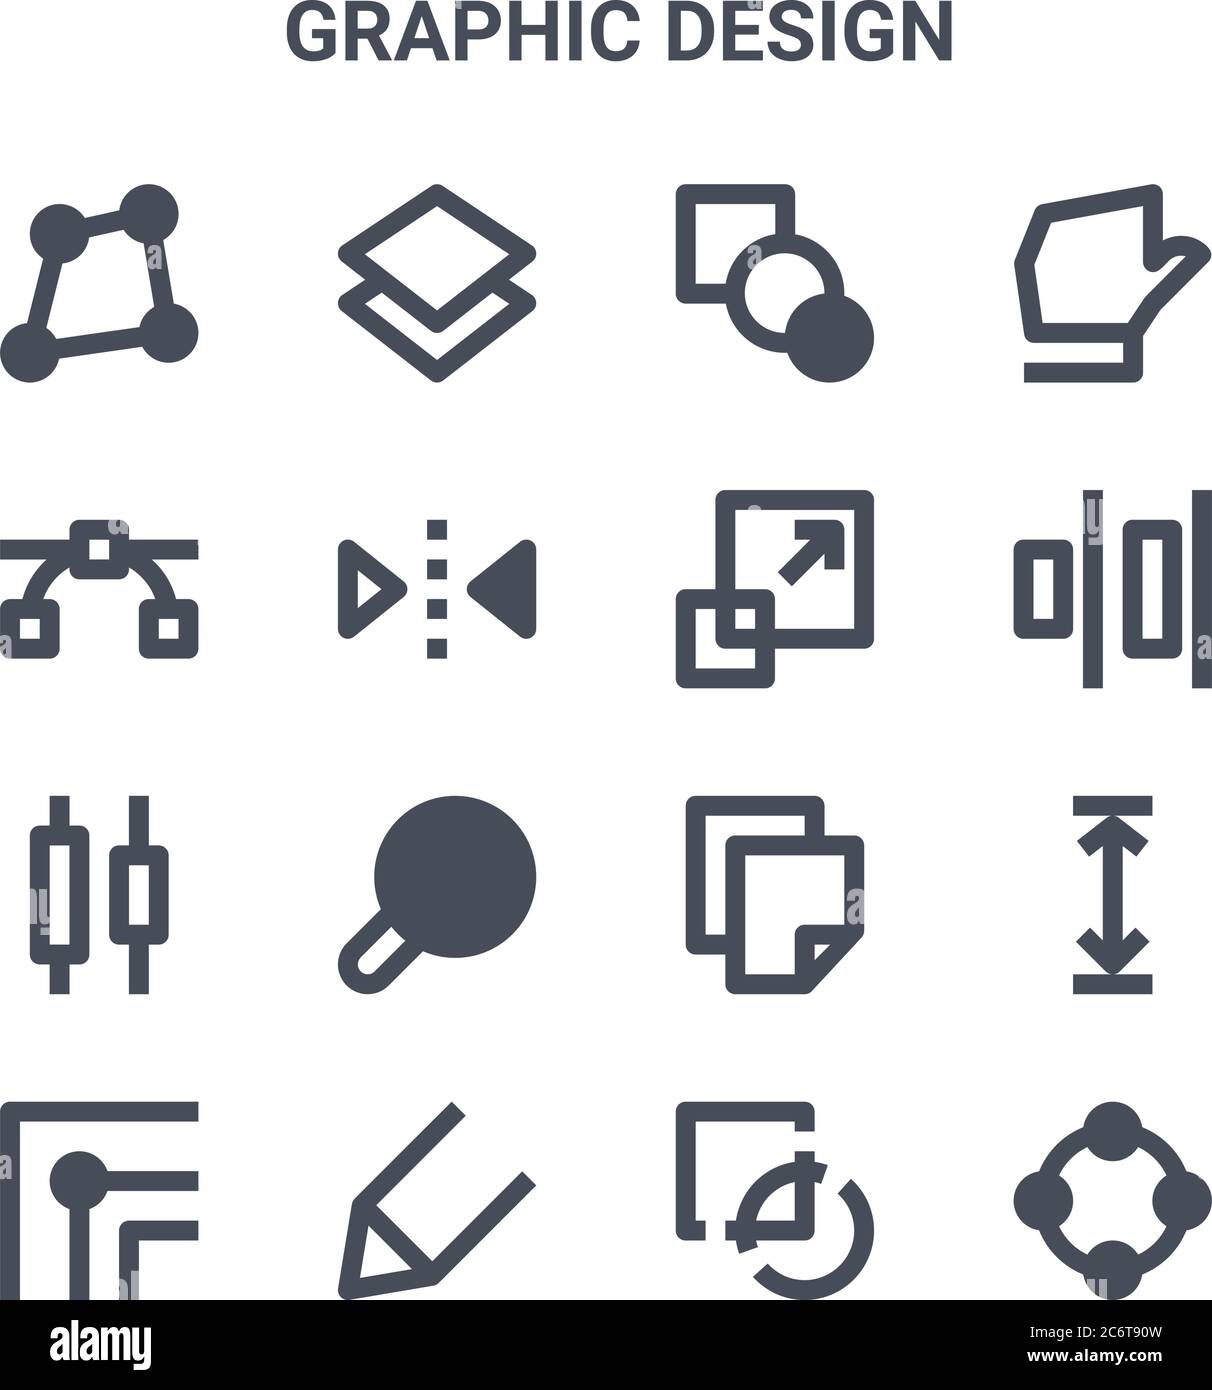 set of 16 graphic design concept vector line icons. 64x64 thin stroke icons such as layers, nodes, align, copy, pencil, nodes, intersect, resize, hand Stock Vector